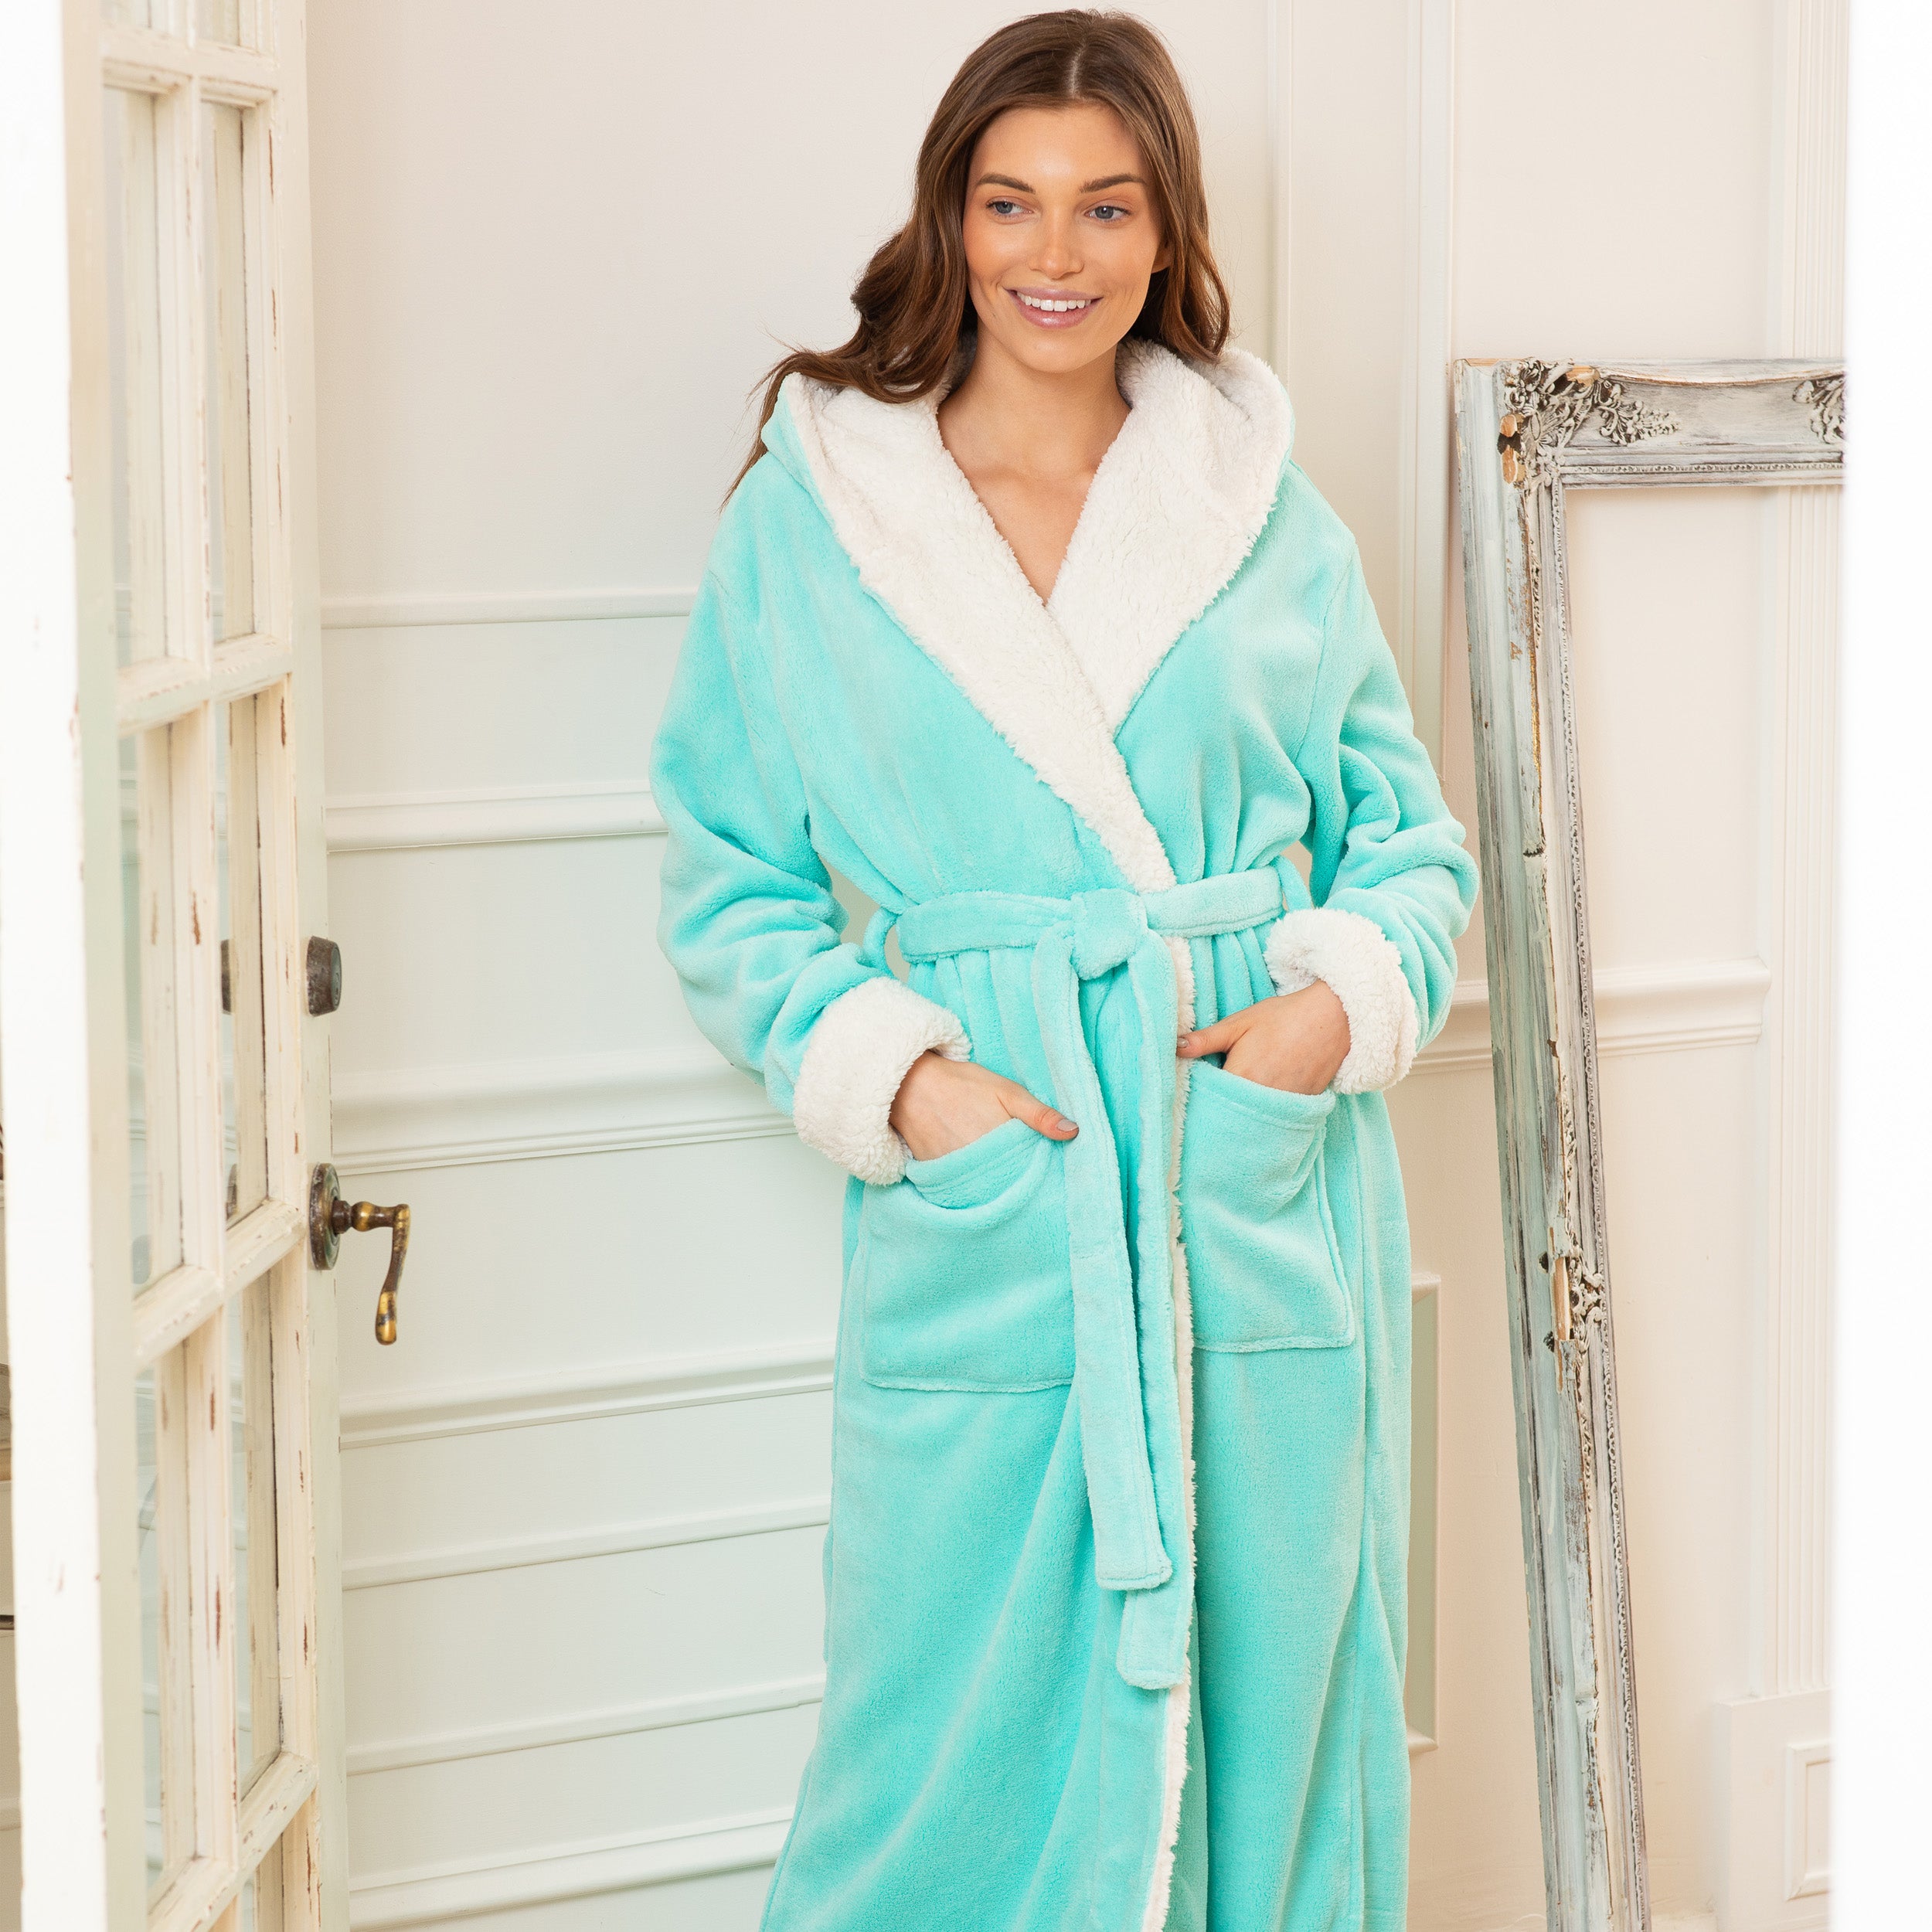 Cozy Bathrobes to Keep You Warm This Winter: Where to Buy